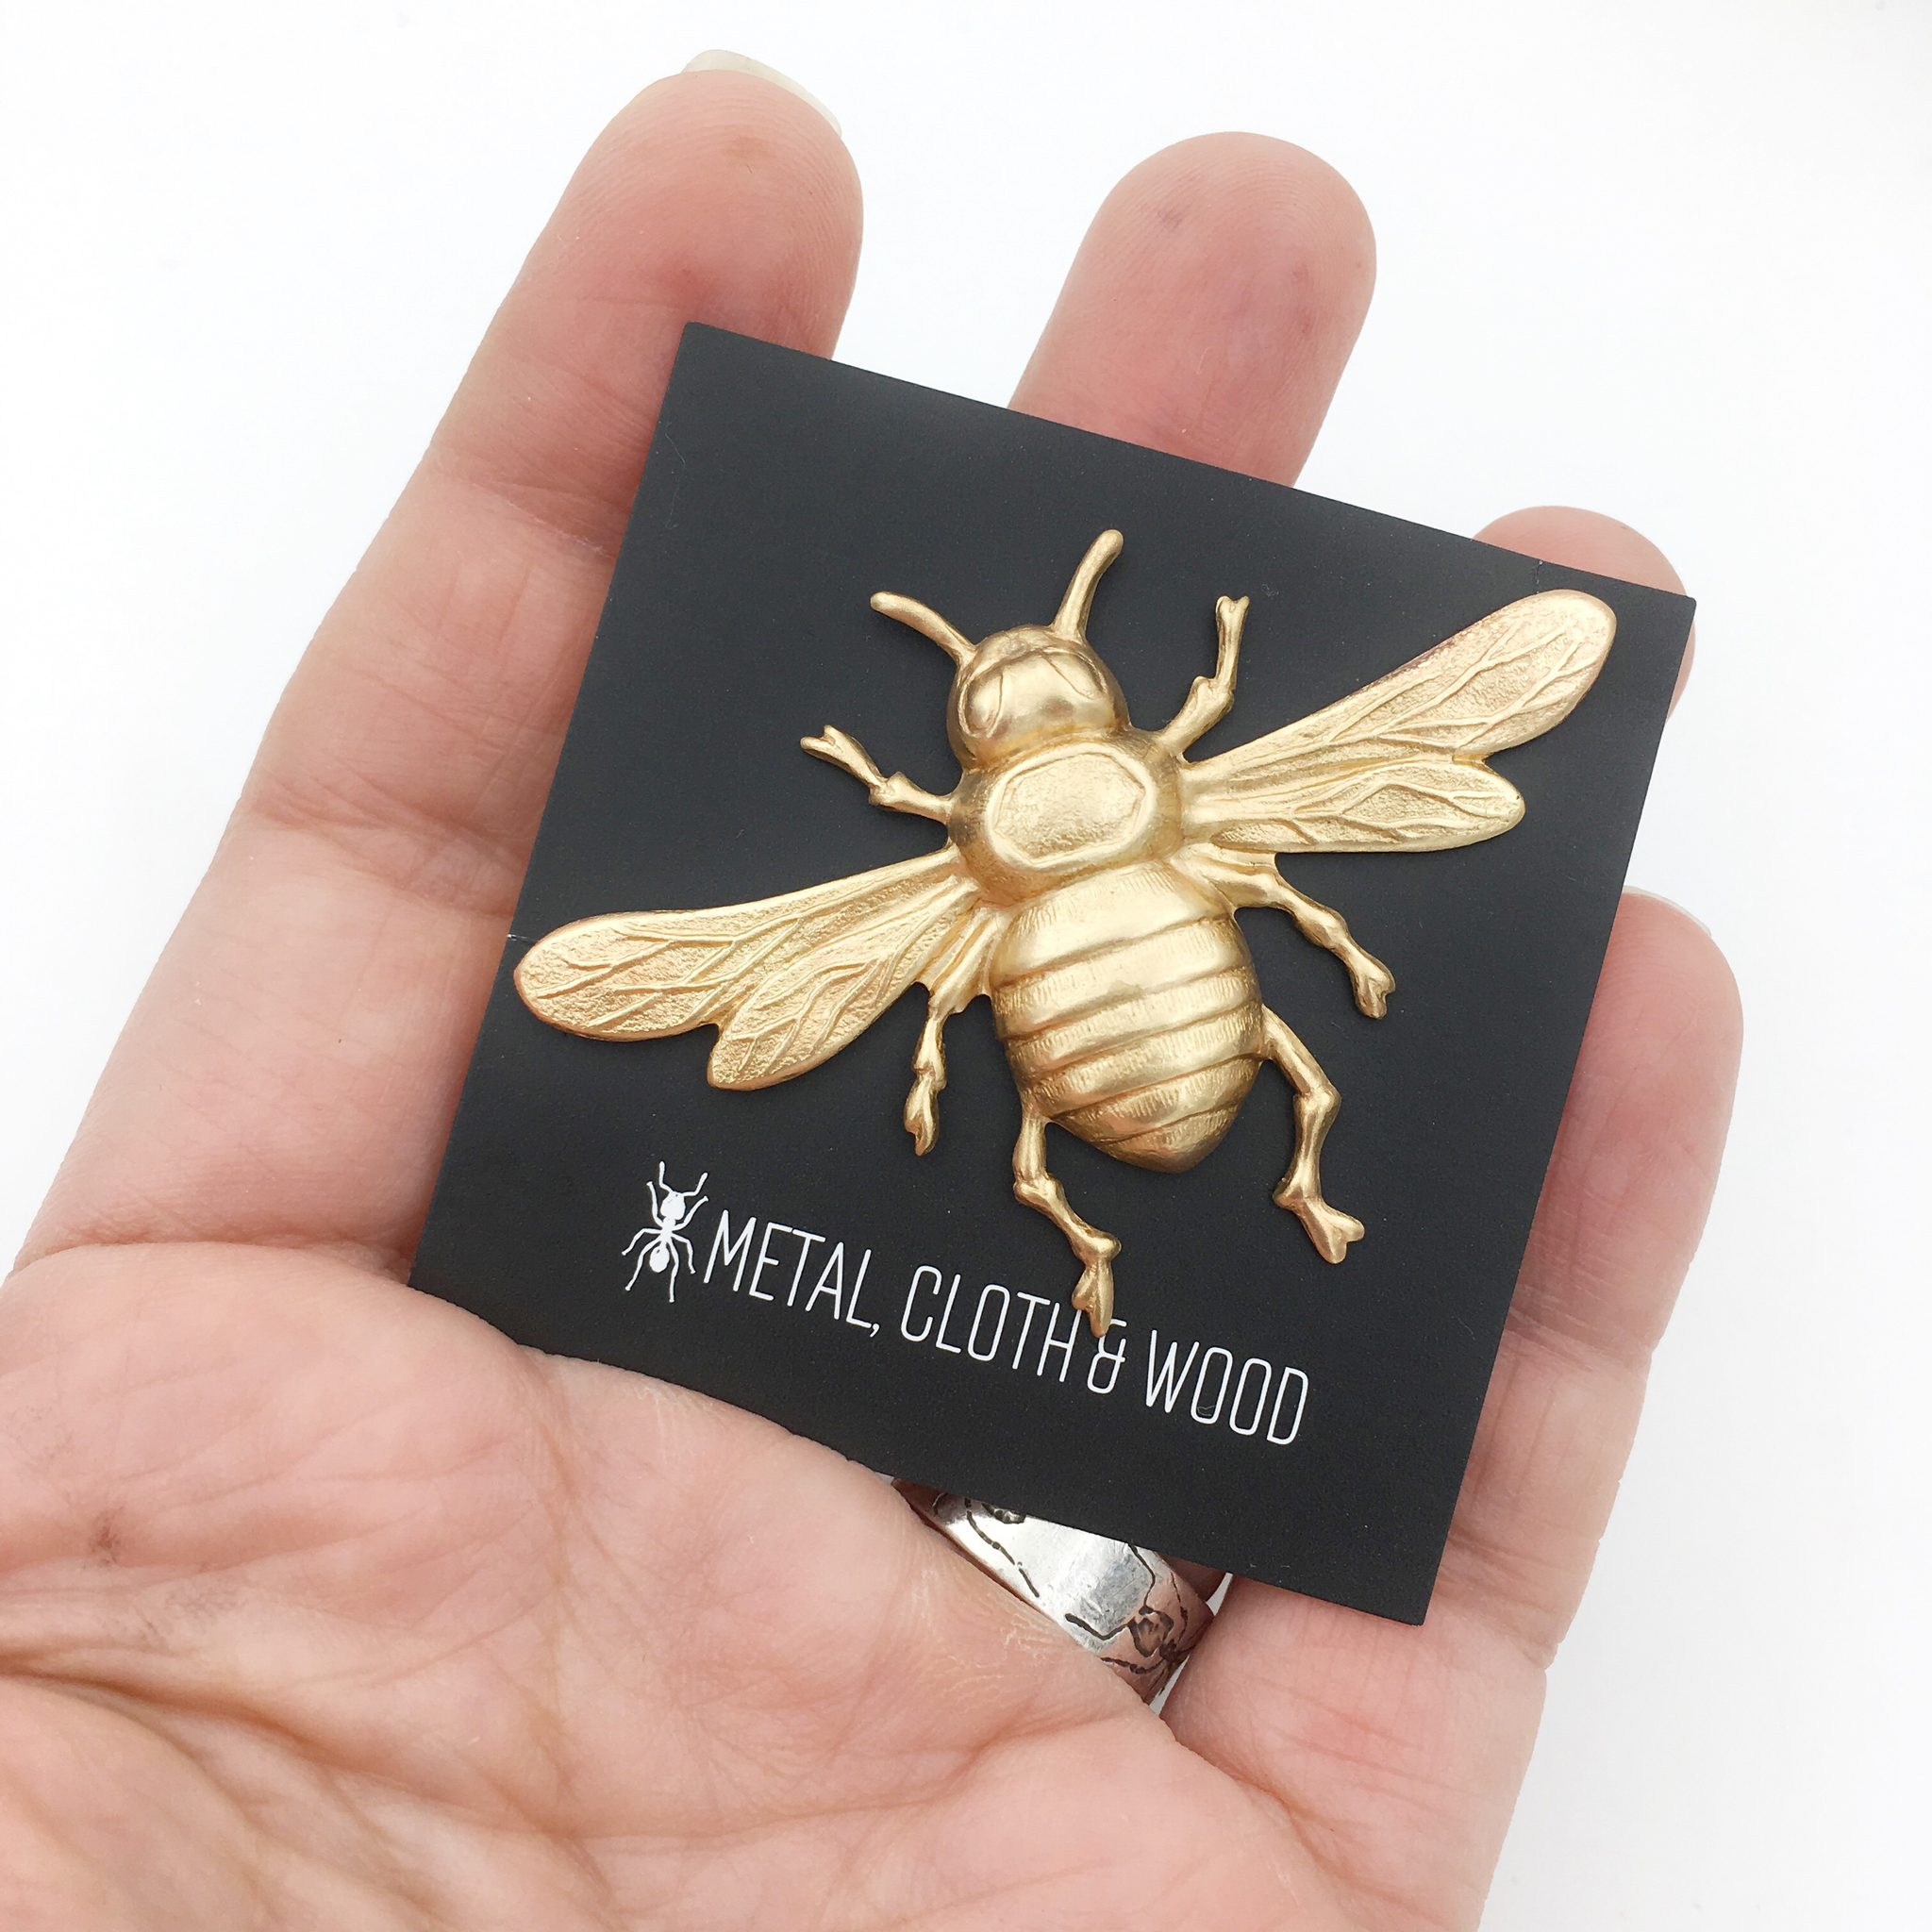 Metal Cloth & Wood - Brass Honeybee Insect Pin or Brooch: Bright Gold